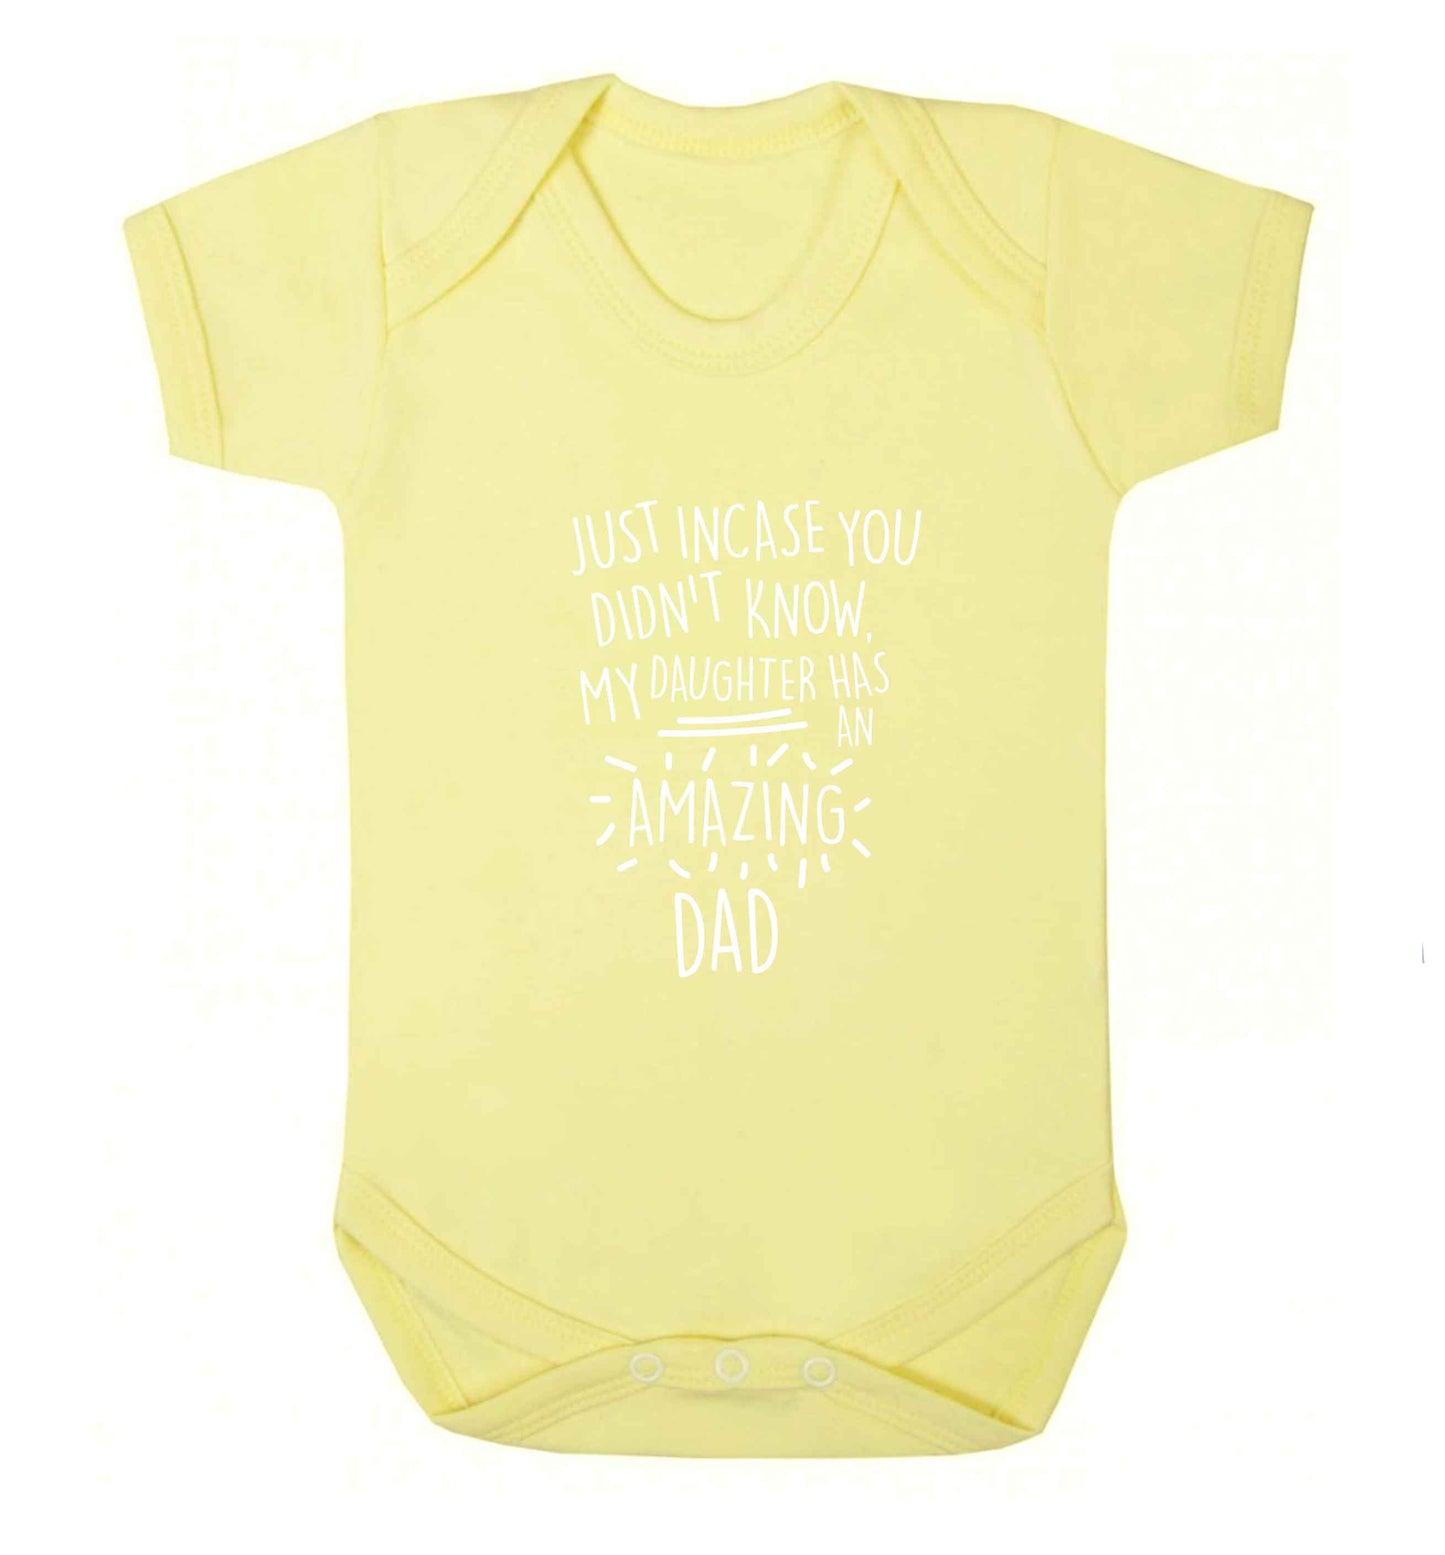 Just incase you didn't know my daughter has an amazing dad baby vest pale yellow 18-24 months